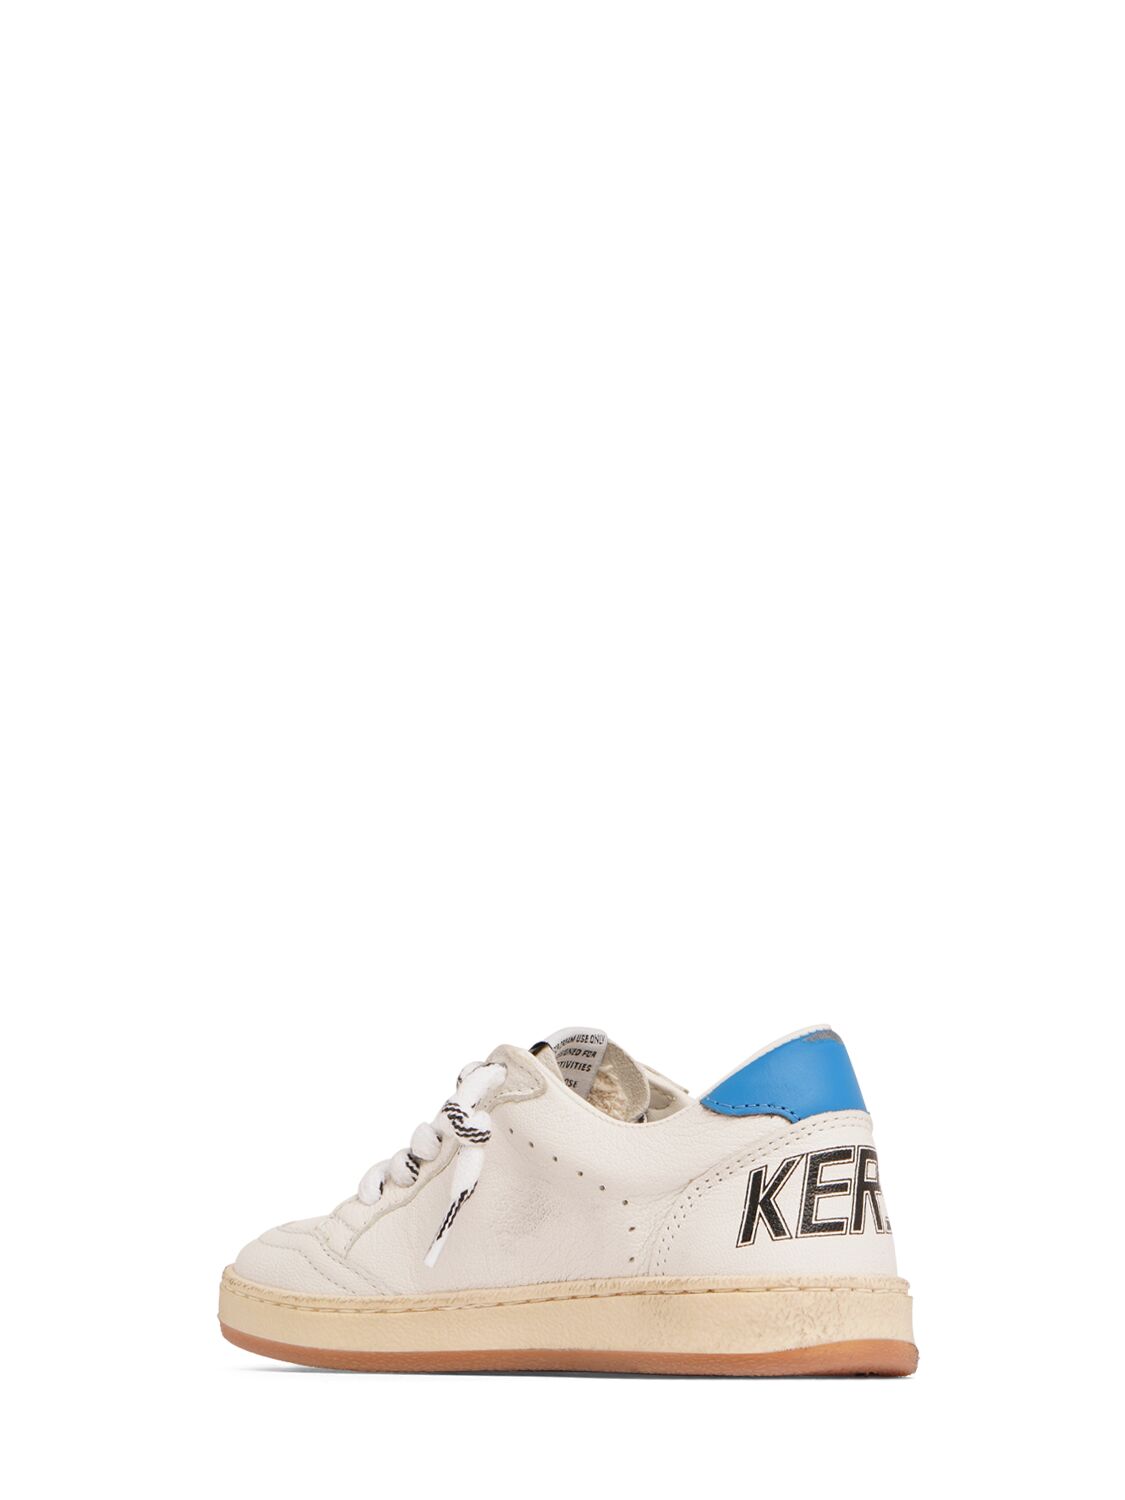 Shop Golden Goose Ballstar Leather Lace-up Sneakers In Red,white,blue